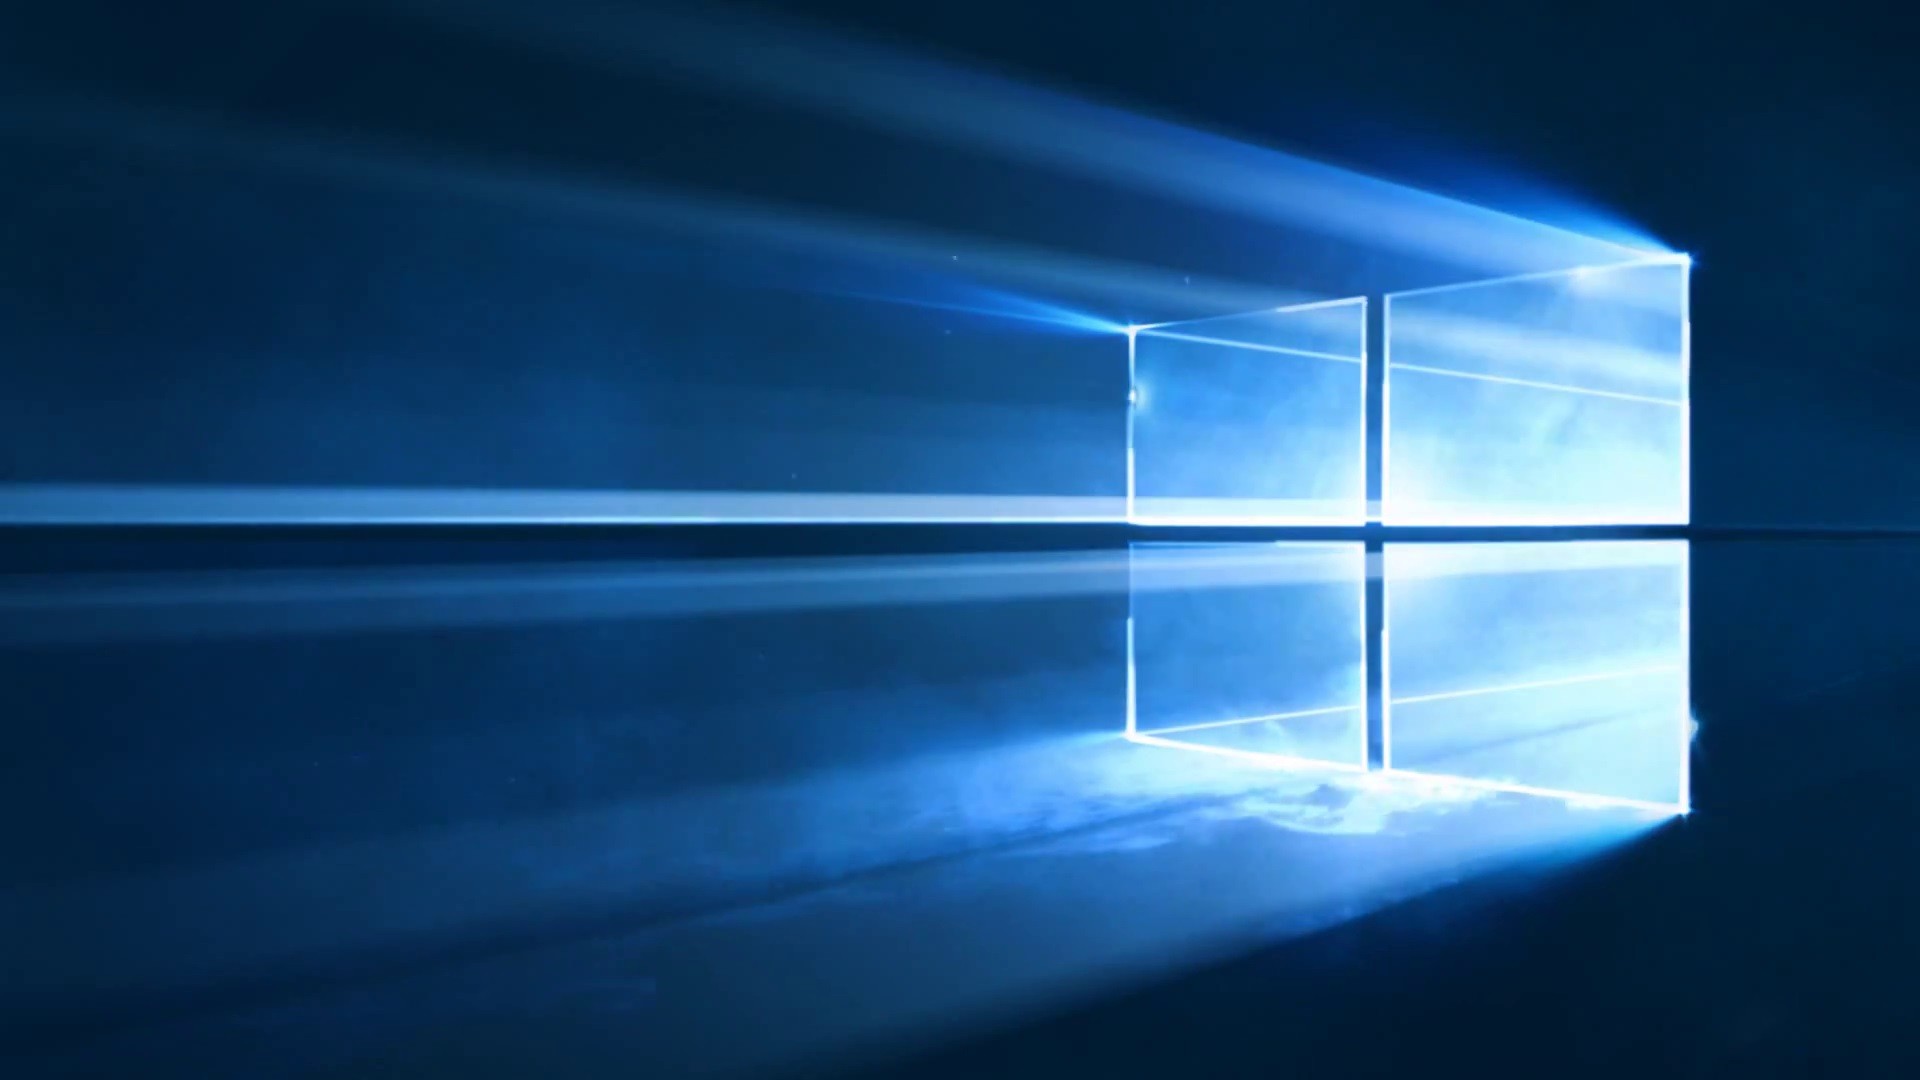 So this is the new default wallpaper for windows 10